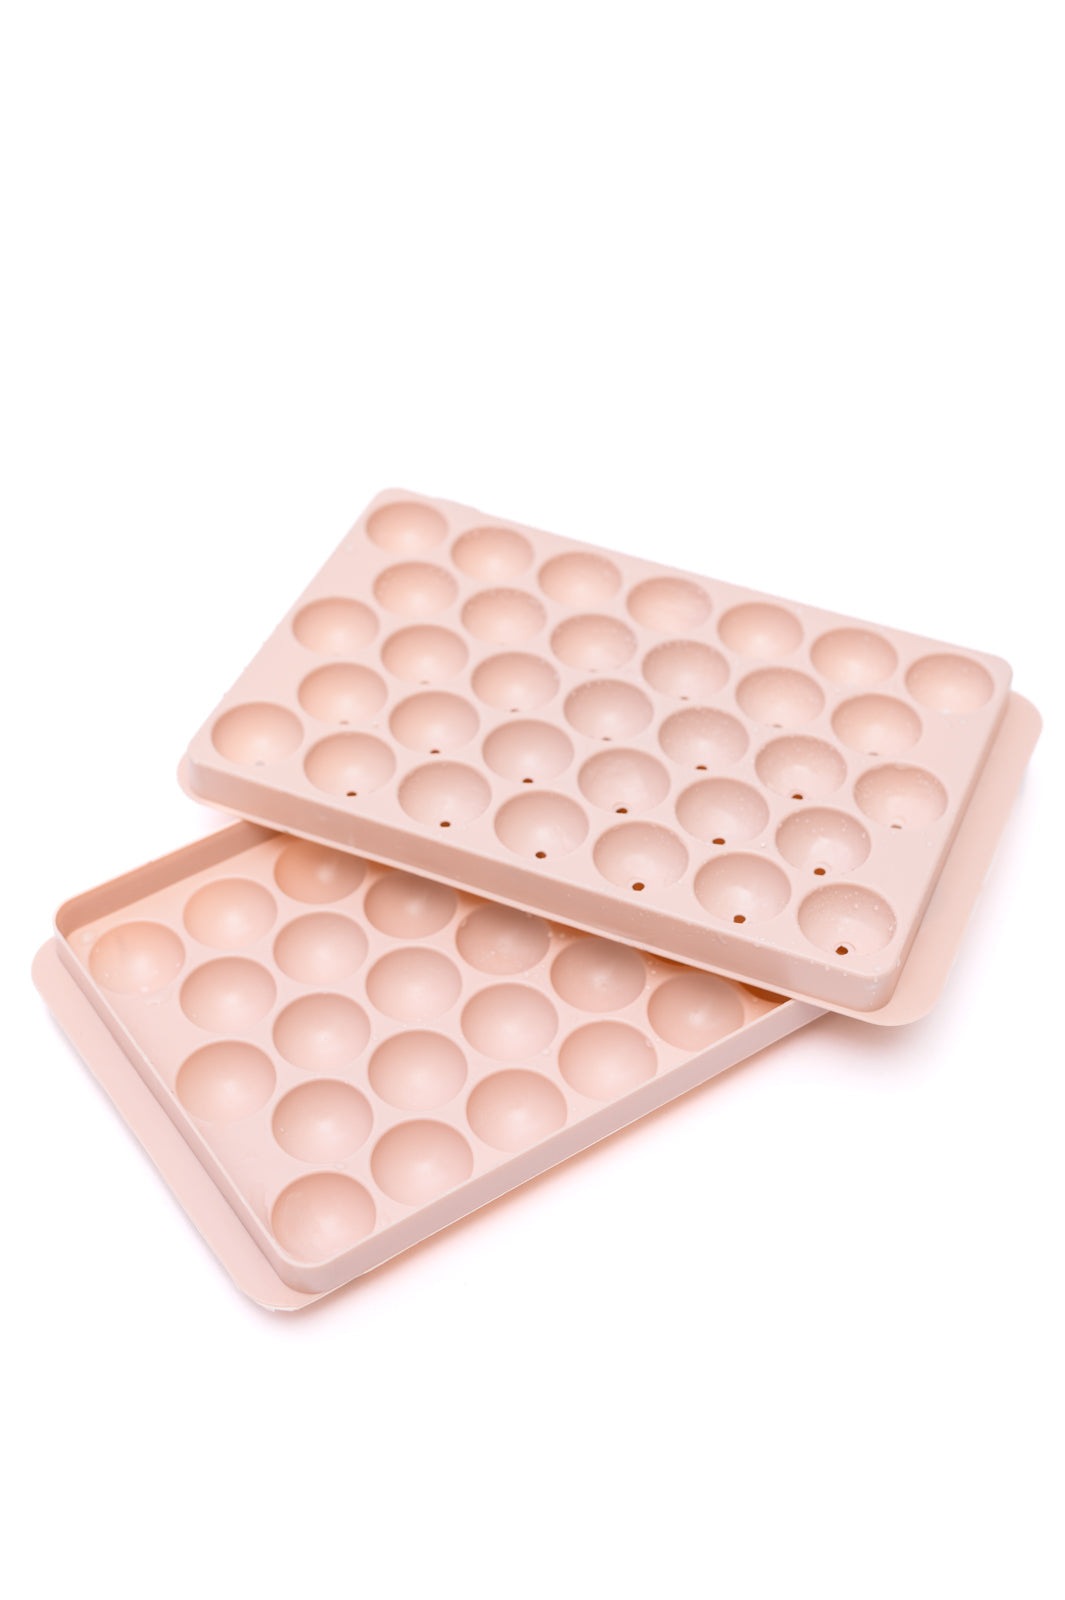 Here's where to buy the round ice cube trays that are all over